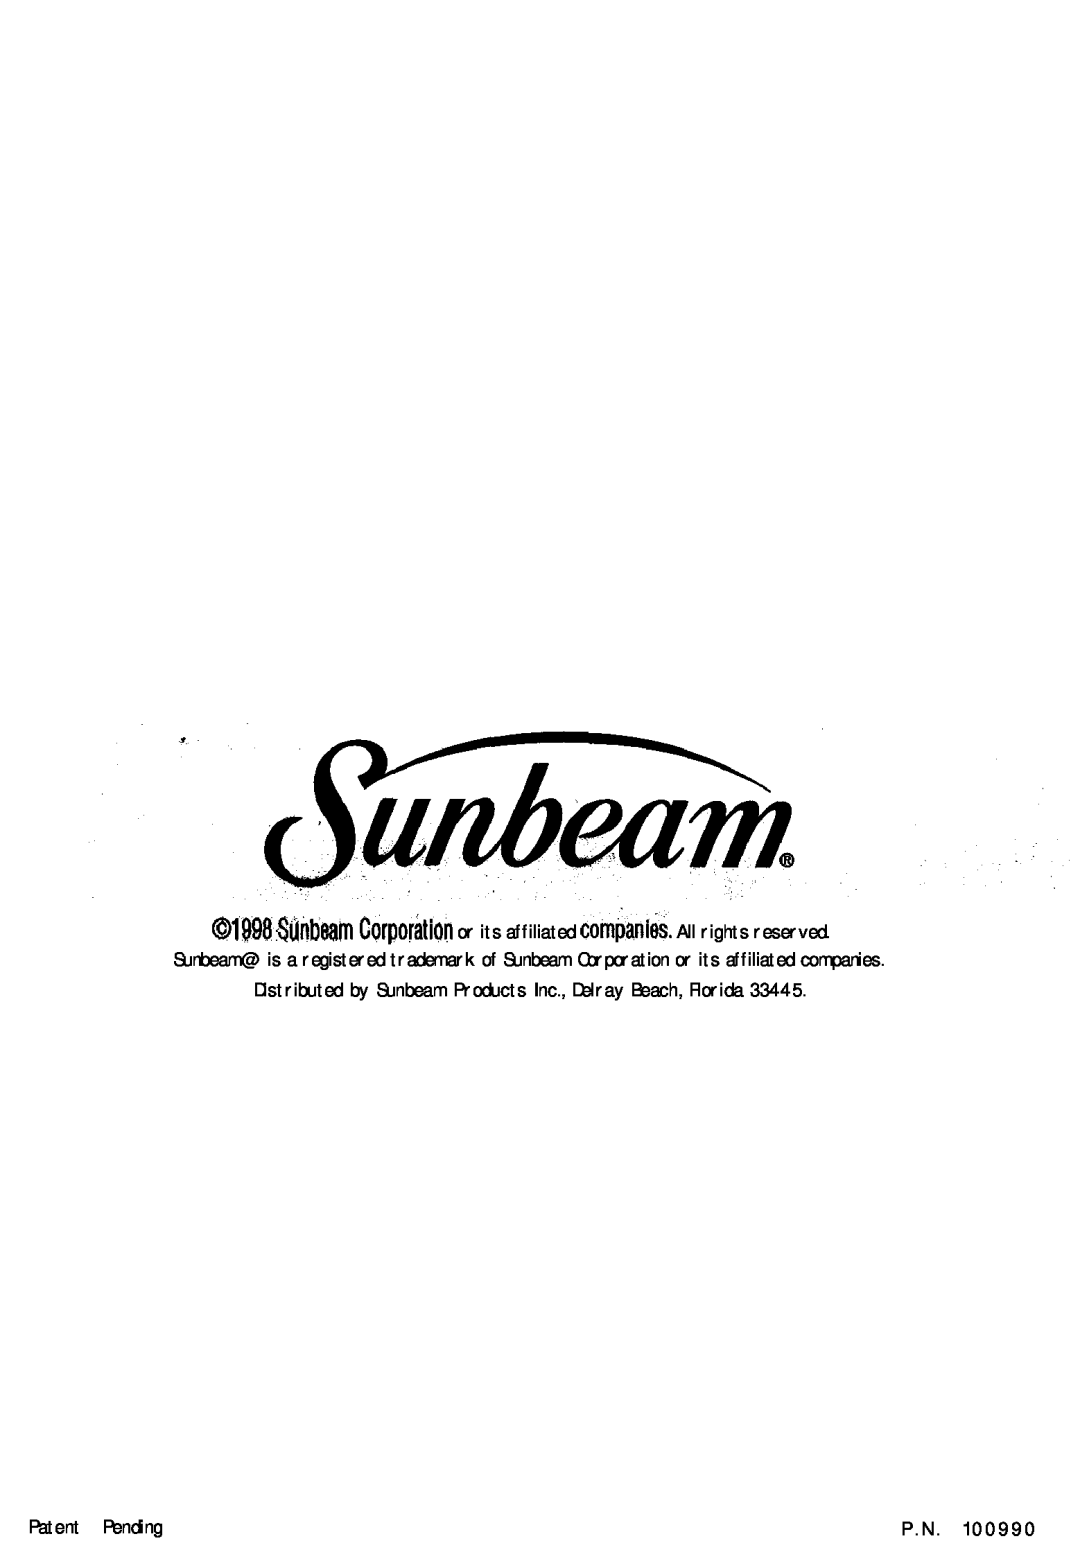 Sunbeam 4744 instruction manual Distributed by Sunbeam Products Inc., Delray Beach, Florida, Patent Pending, P . N 